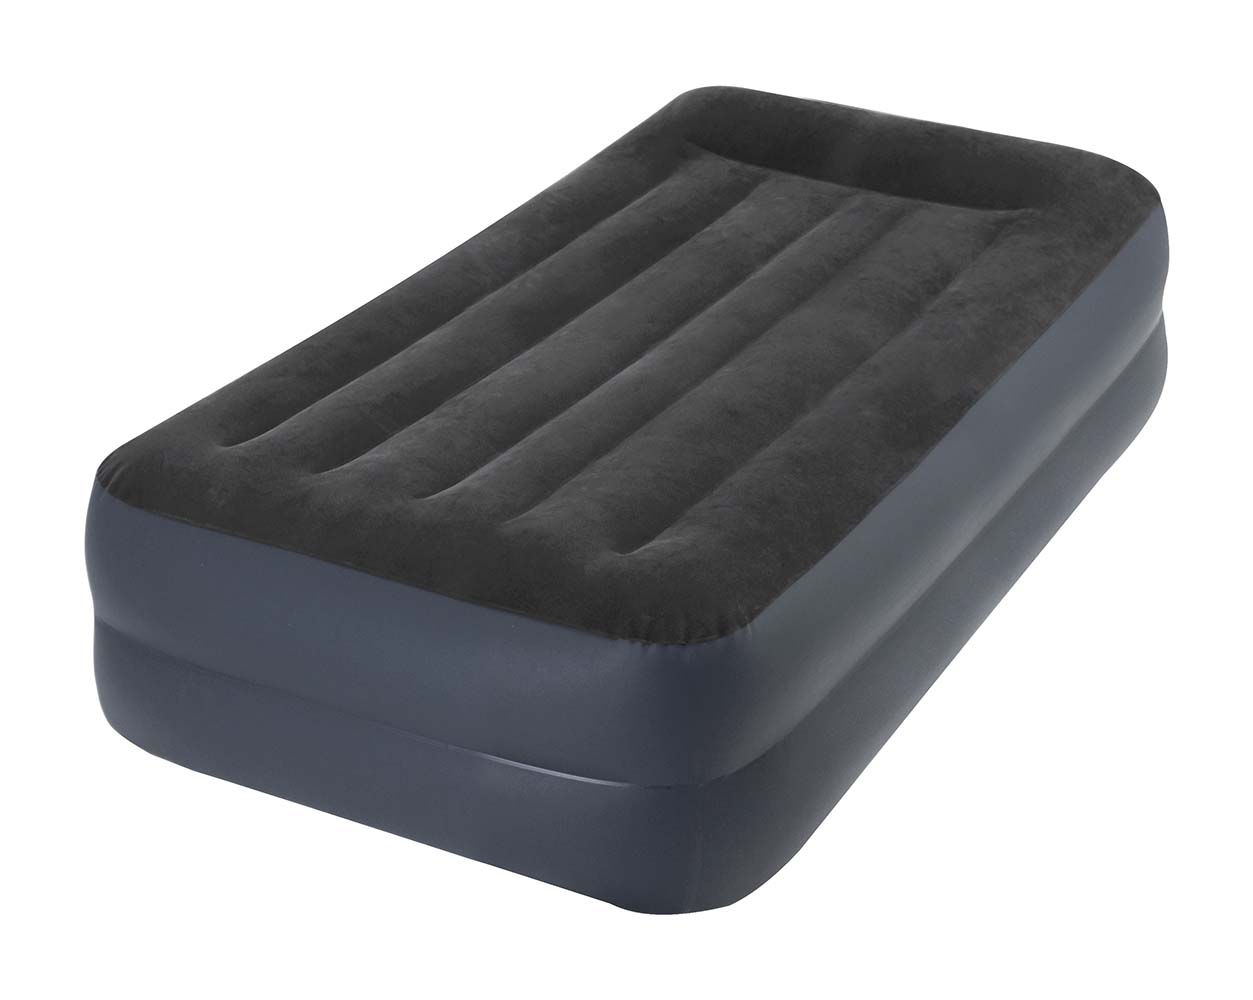 3264122 A luxurious double layer 1 person air mattress. This mattress is inflated in 2 minutes with the built-in electric pump. Because of the extremely soft and water repellent top layer, and integrated pillow this air mattress provides a high level of comfort. The mattress is also extra sturdy and strong because of the use of Dura-Beam®. The dividers have been replaced by thousands of rock-solid polyester threads, so the dividers can no longer break. Comes in a handy carry bag.